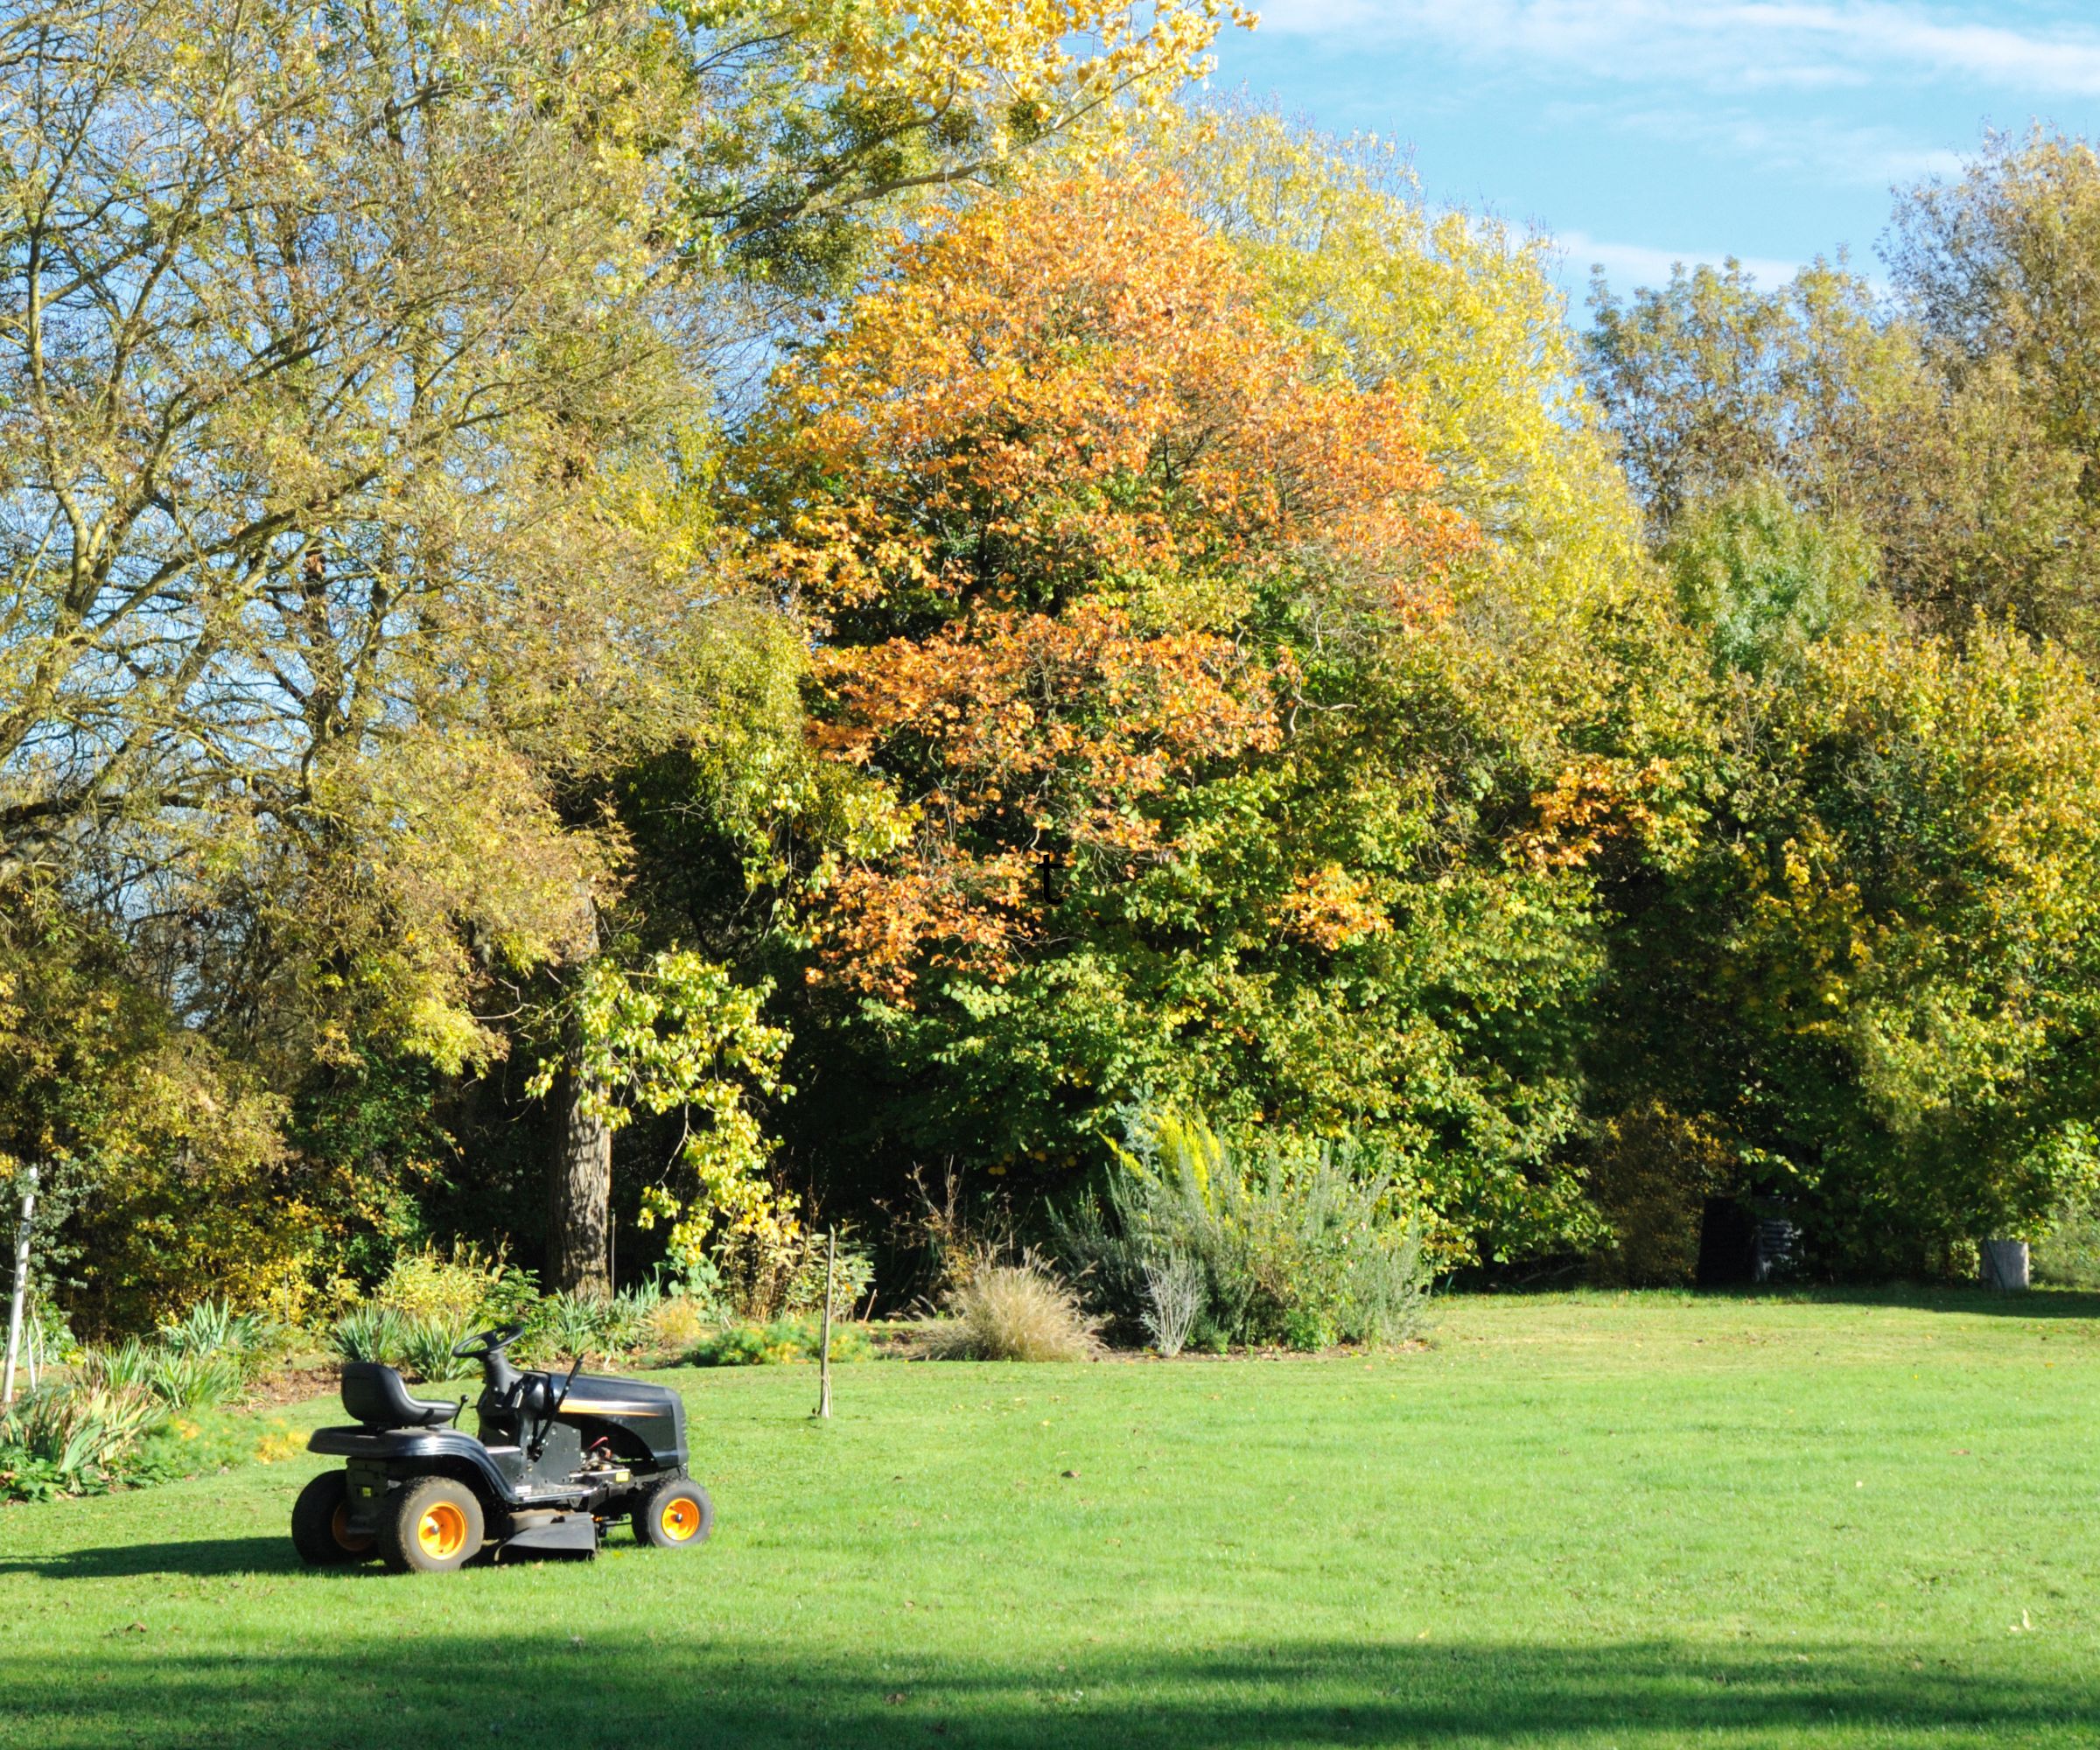 A tractor mower on a lawn